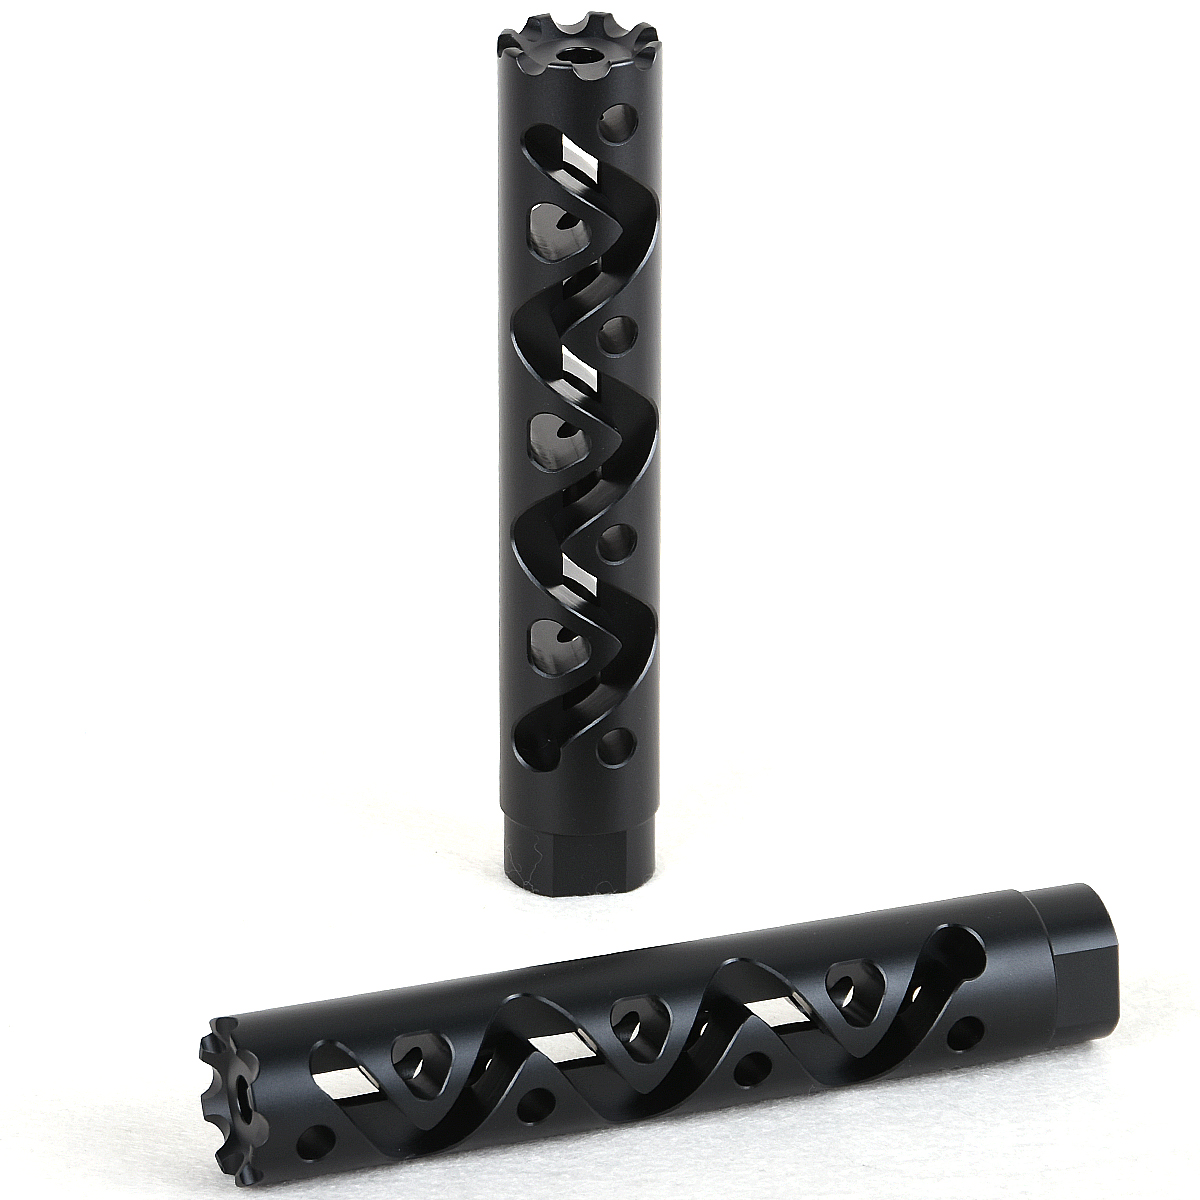 

5.5 Inch Length 7075 Aluminium 1/2x28 fit for .223 5.56mm .22cal Muzzle Brake Compensator W/ Crush Washer, Customize